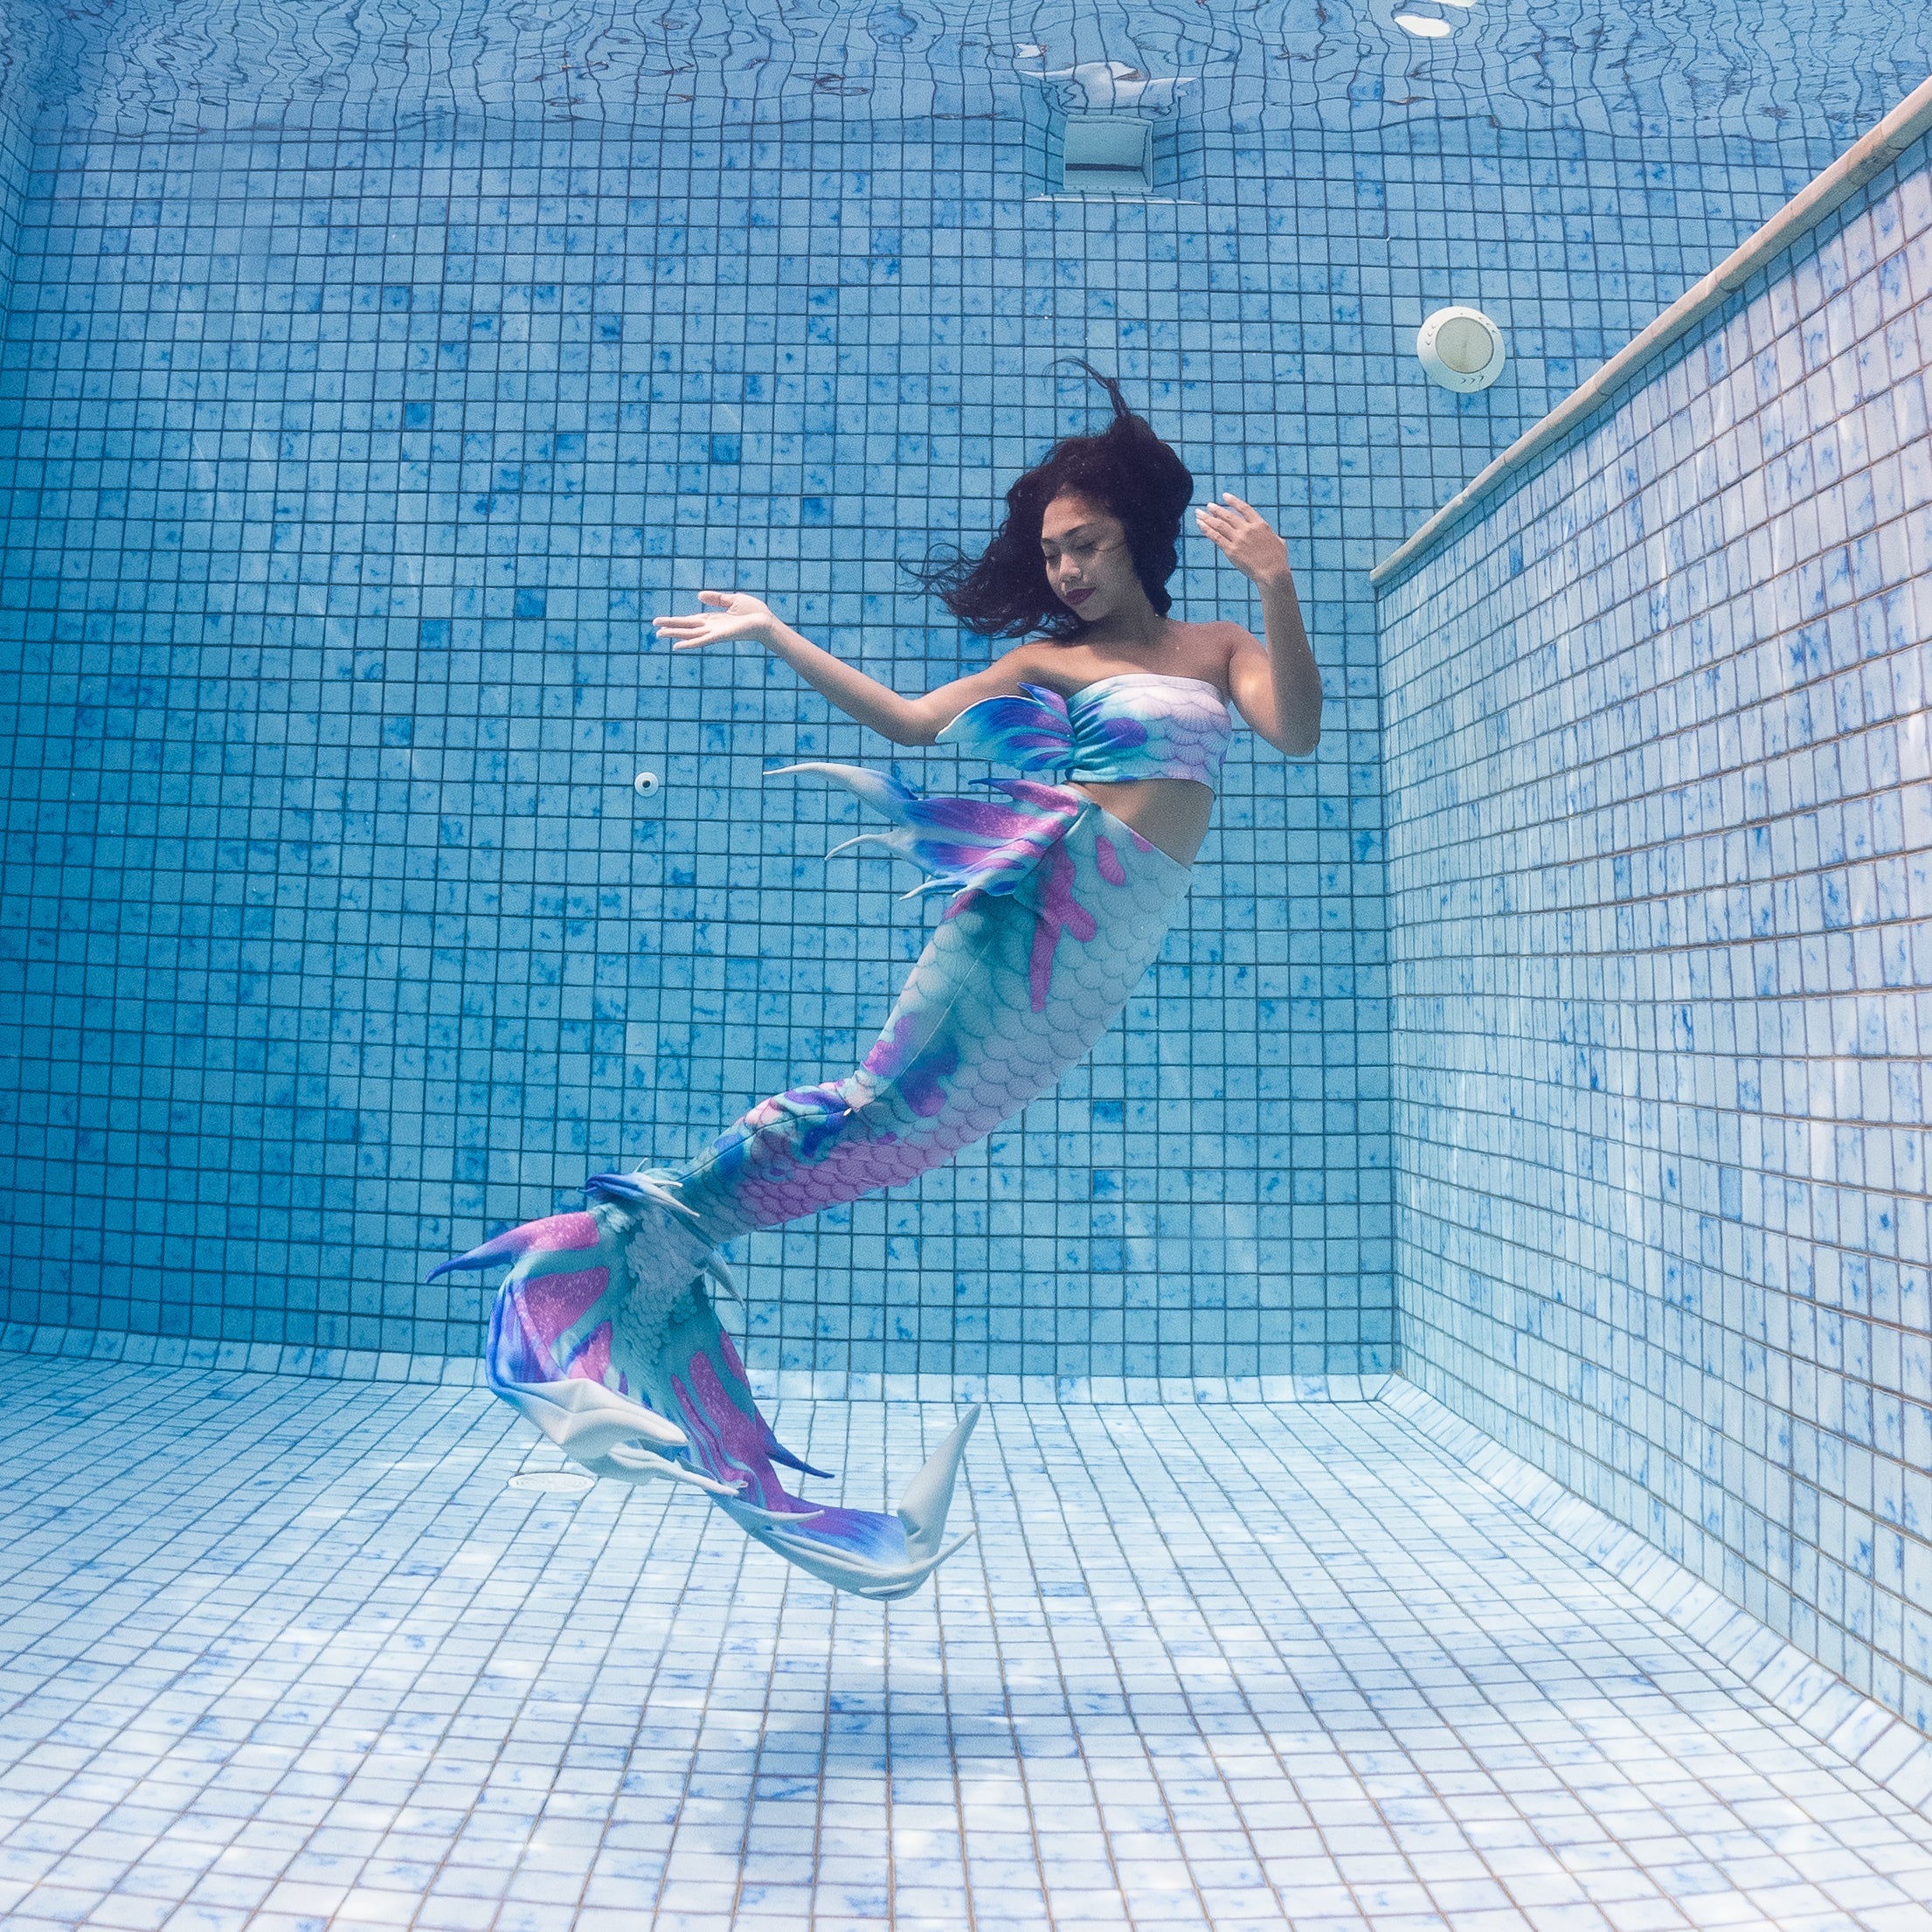 Mermaid Tails Inspired by Real Fish